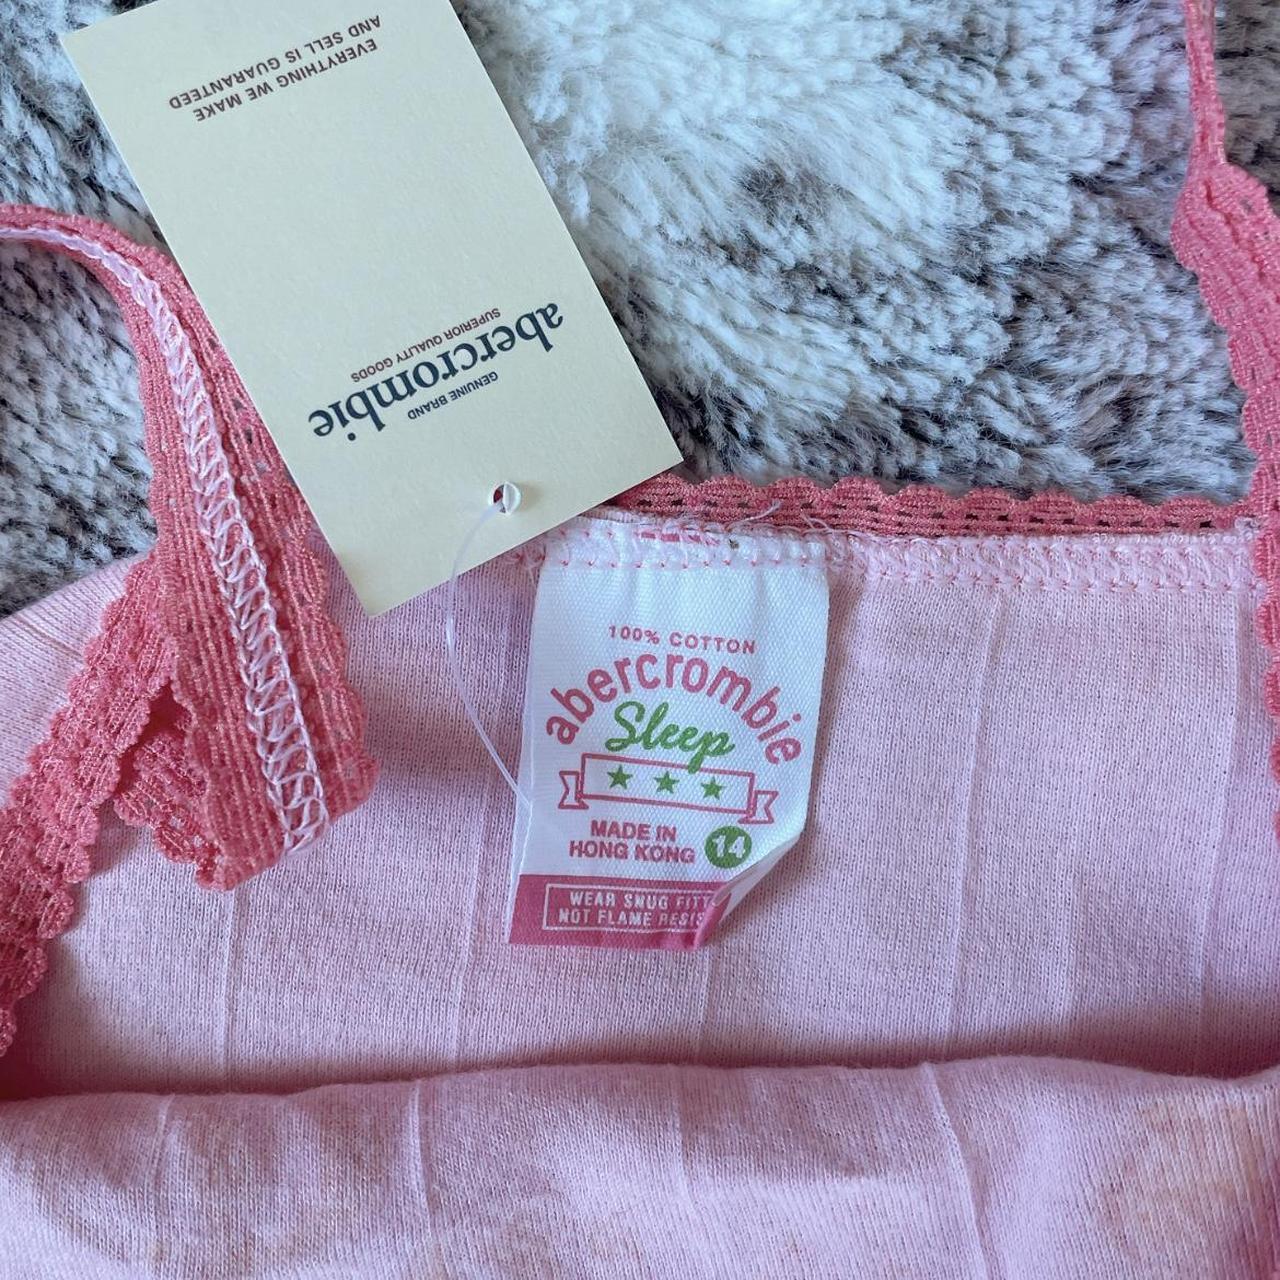 Vintage Abercrombie tank 🧸🎀 TAKING OFFERS!! This... - Depop